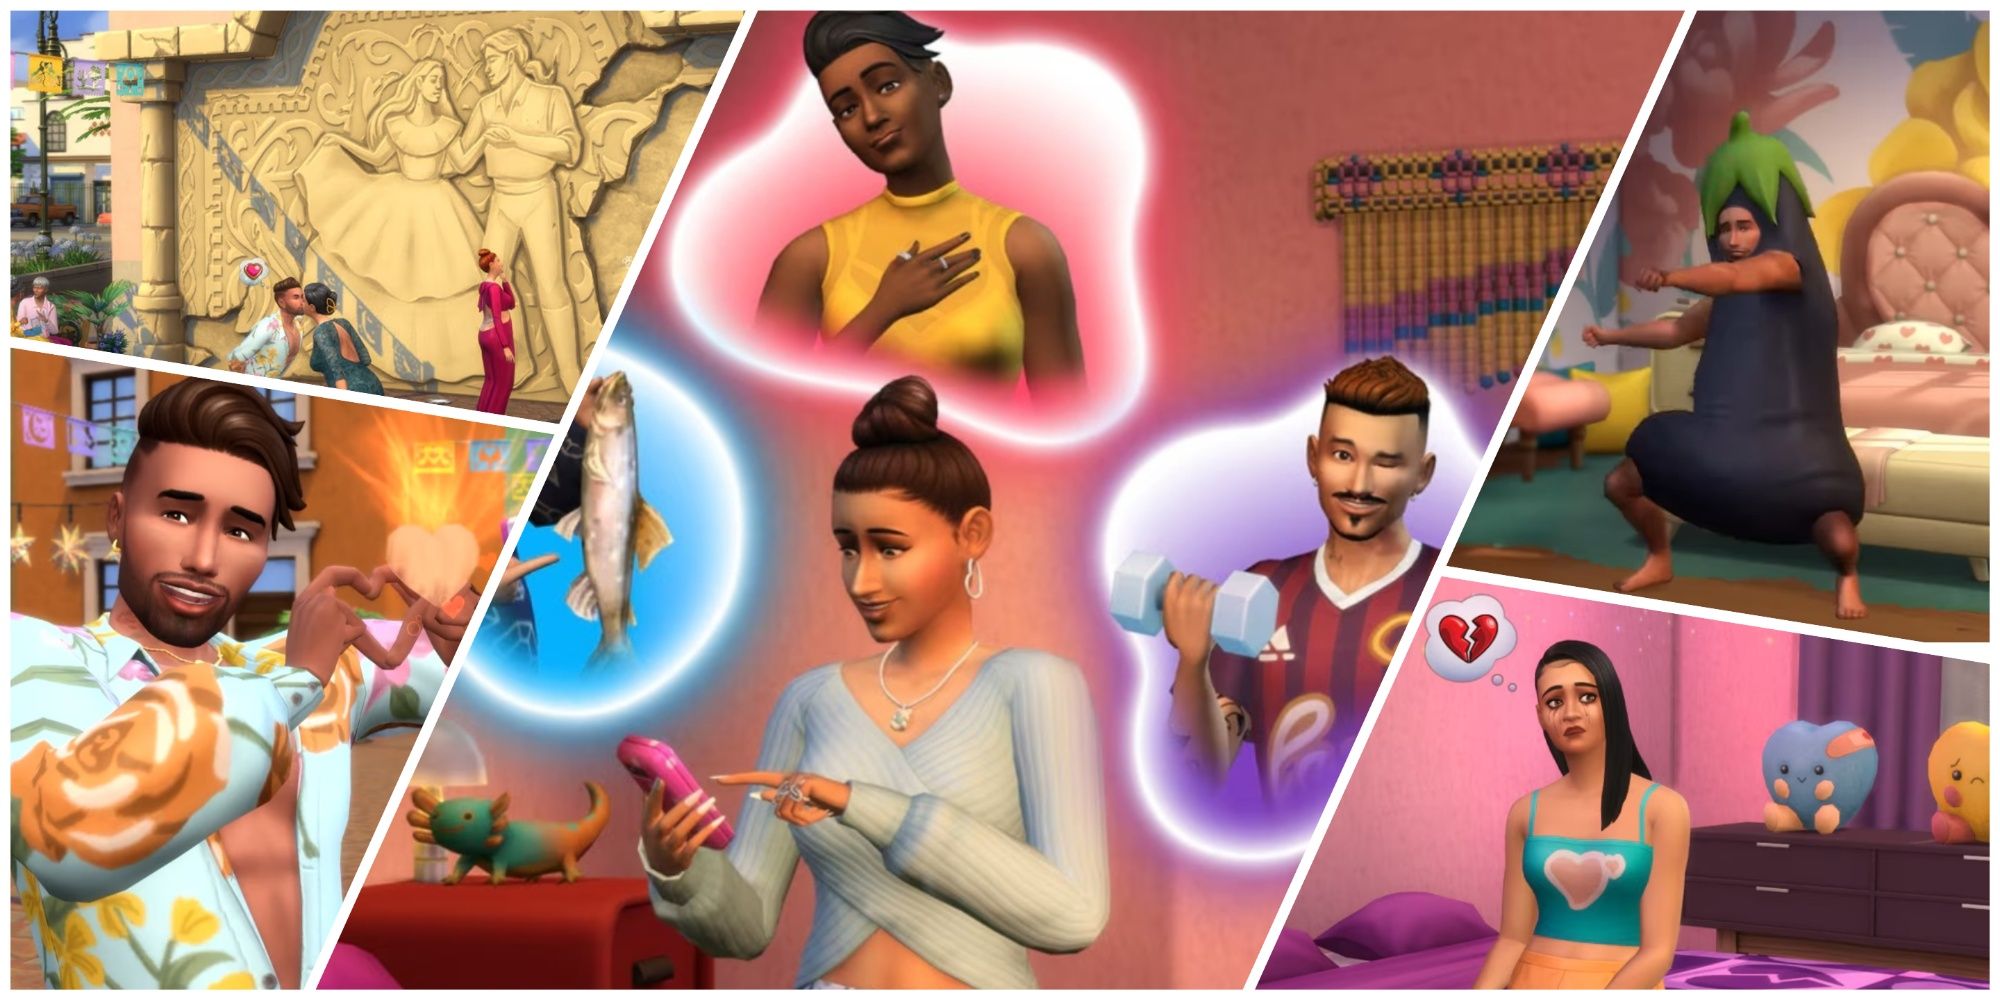 Dating Apps, Eggplants, Heartbreak and Love in The Sims 4: Lovestruck Expansion Pack